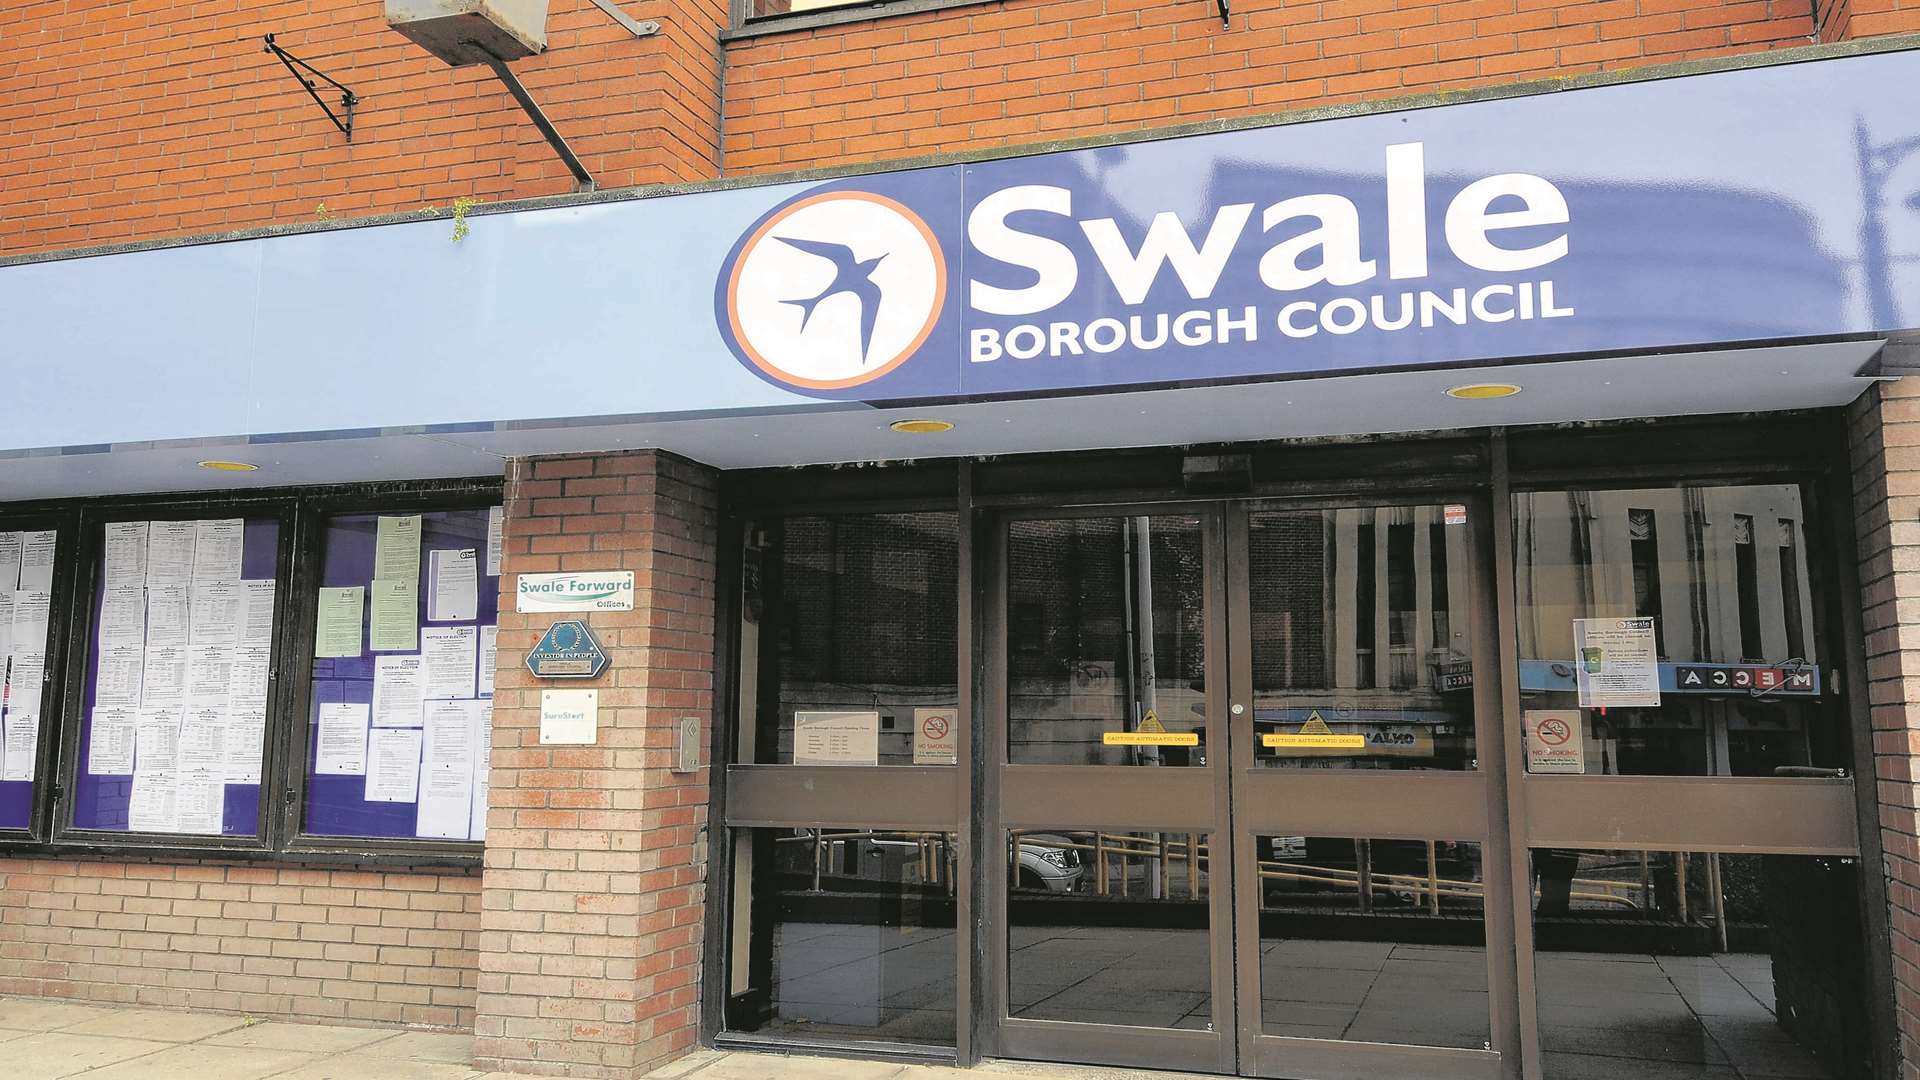 Swale council's head office, Swale House